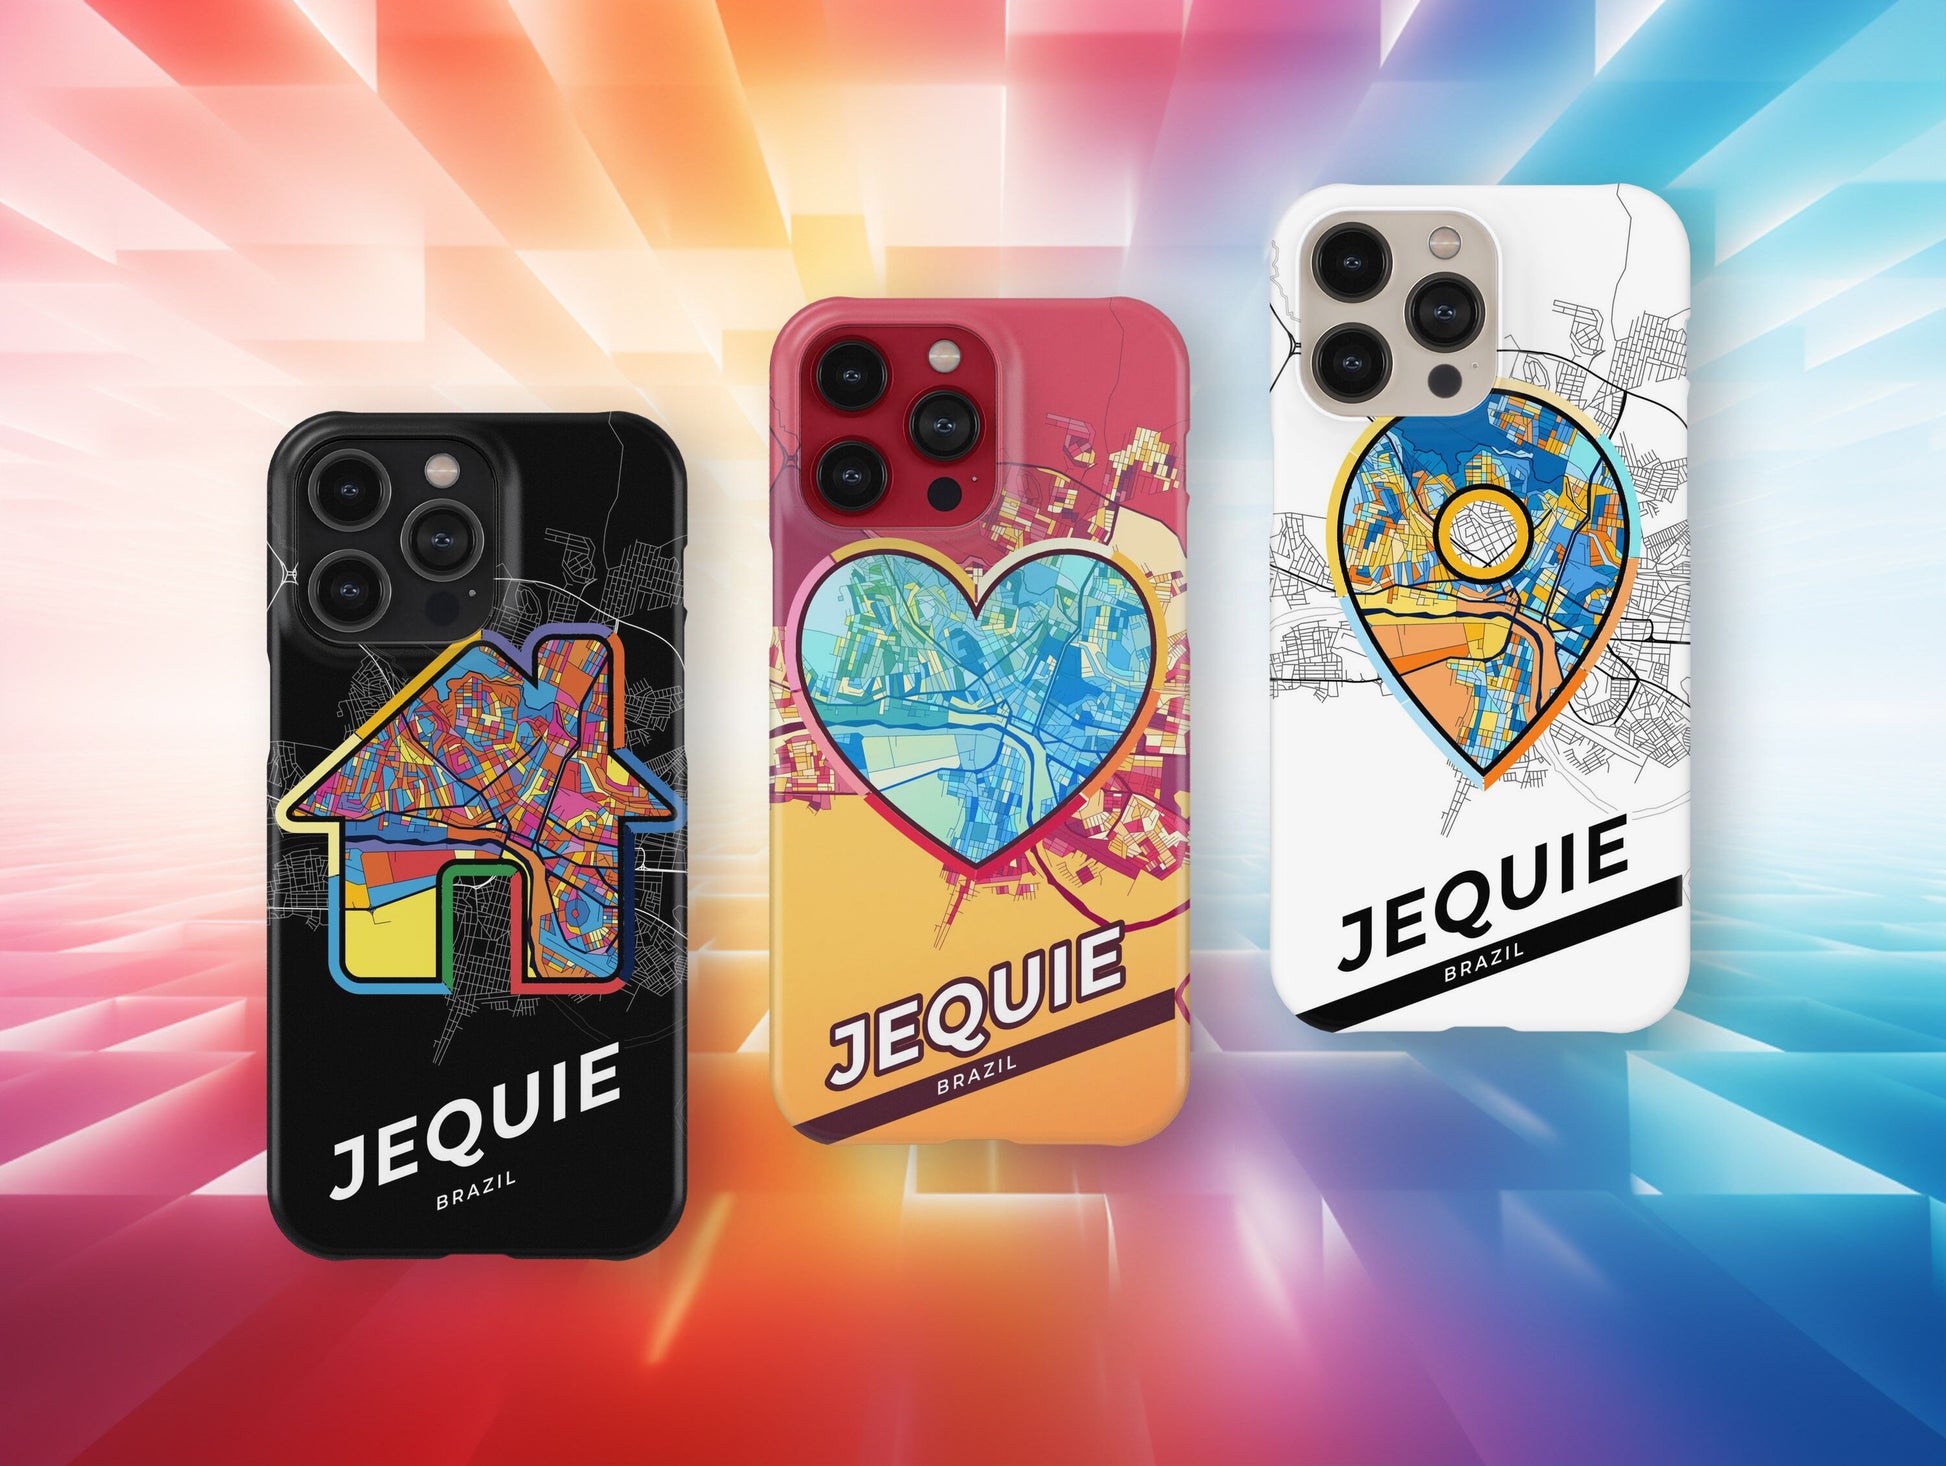 Jequie Brazil slim phone case with colorful icon. Birthday, wedding or housewarming gift. Couple match cases.